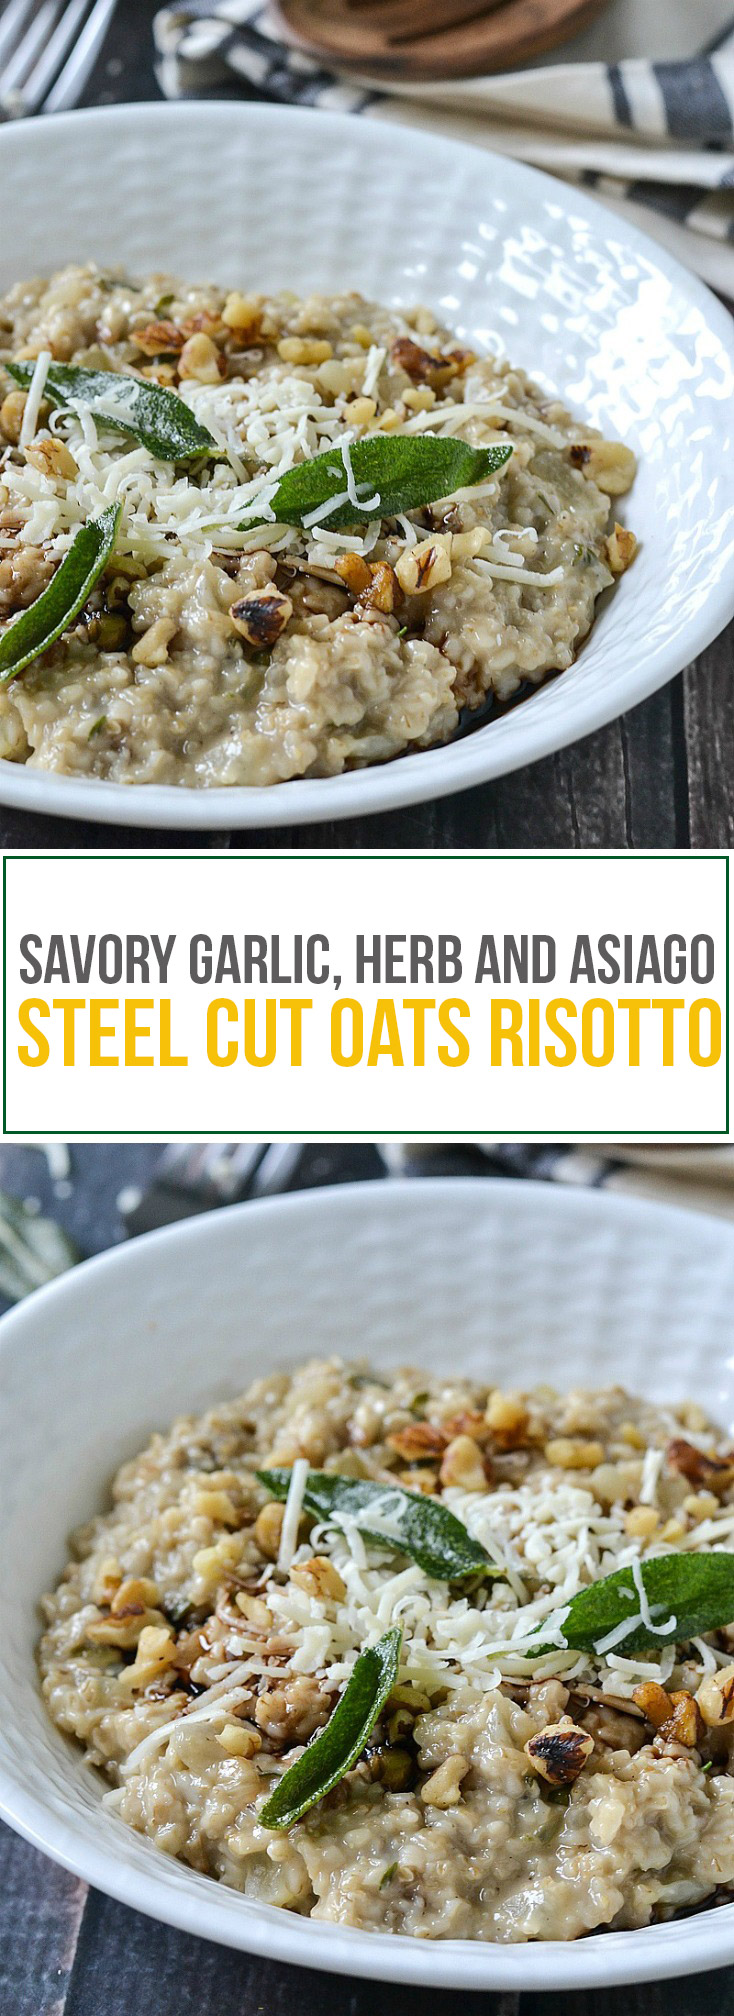 Savory Garlic, Herb and Asiago Steel Cut Oats Risotto | www.motherthyme.com 